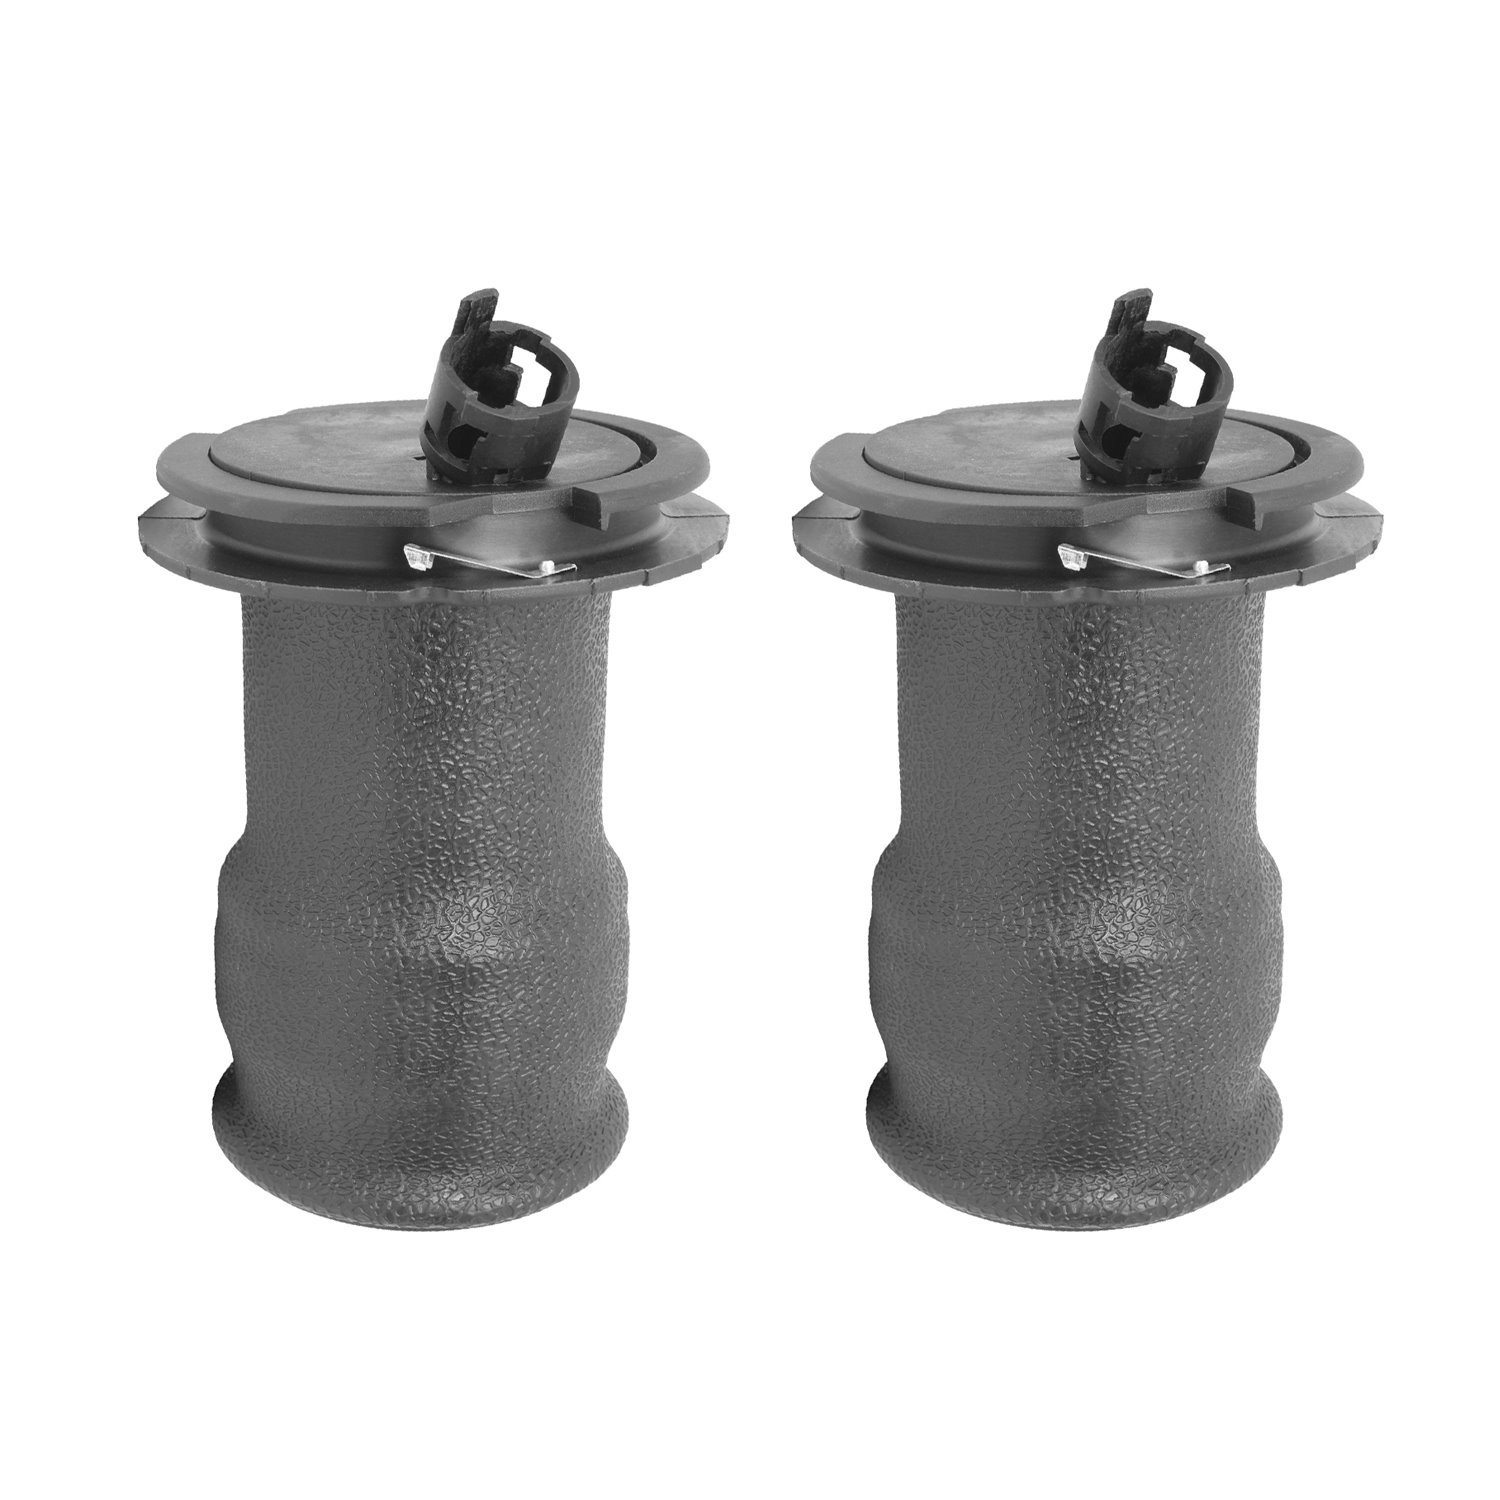 2-15-136000 Front Suspension Air Spring Set Fits Select Lincoln Continental, Lincoln Mark VII